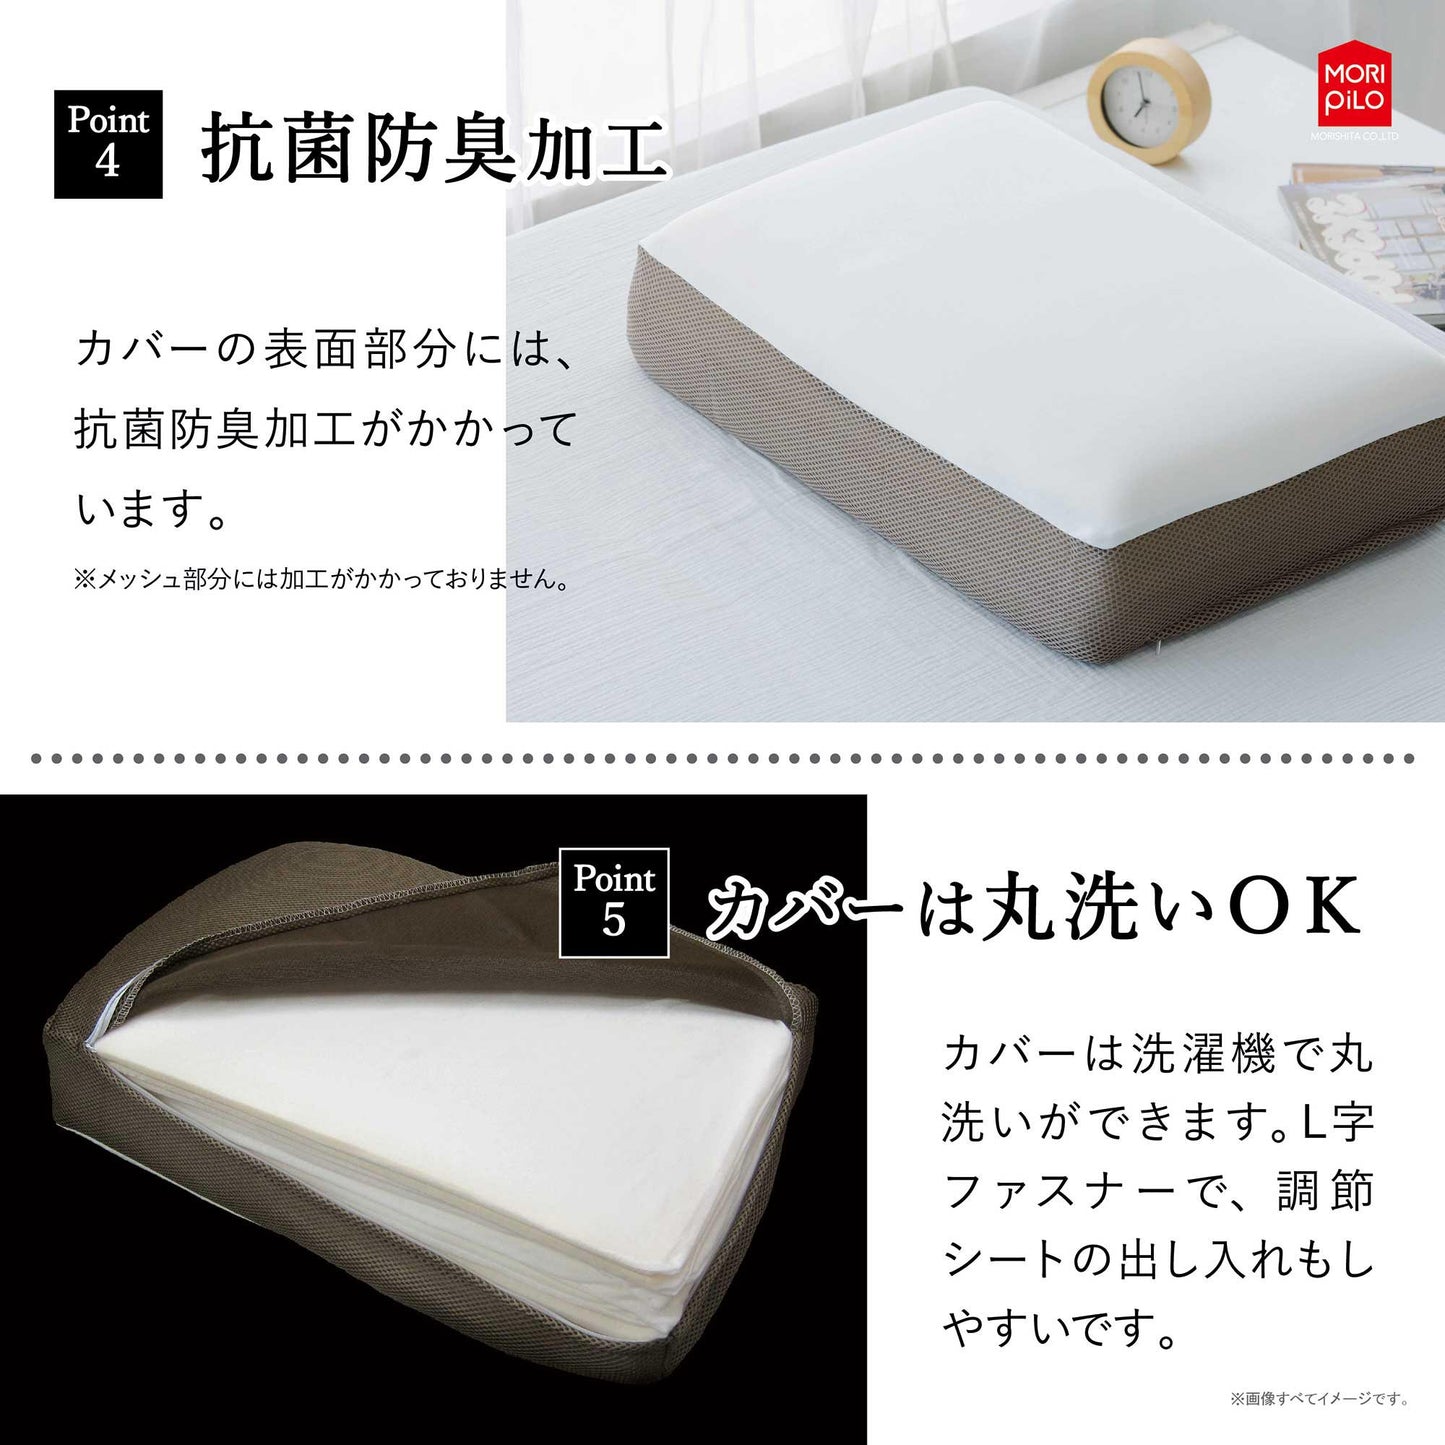 8-level adjustable pillow with high resilience so you don't have to worry about height